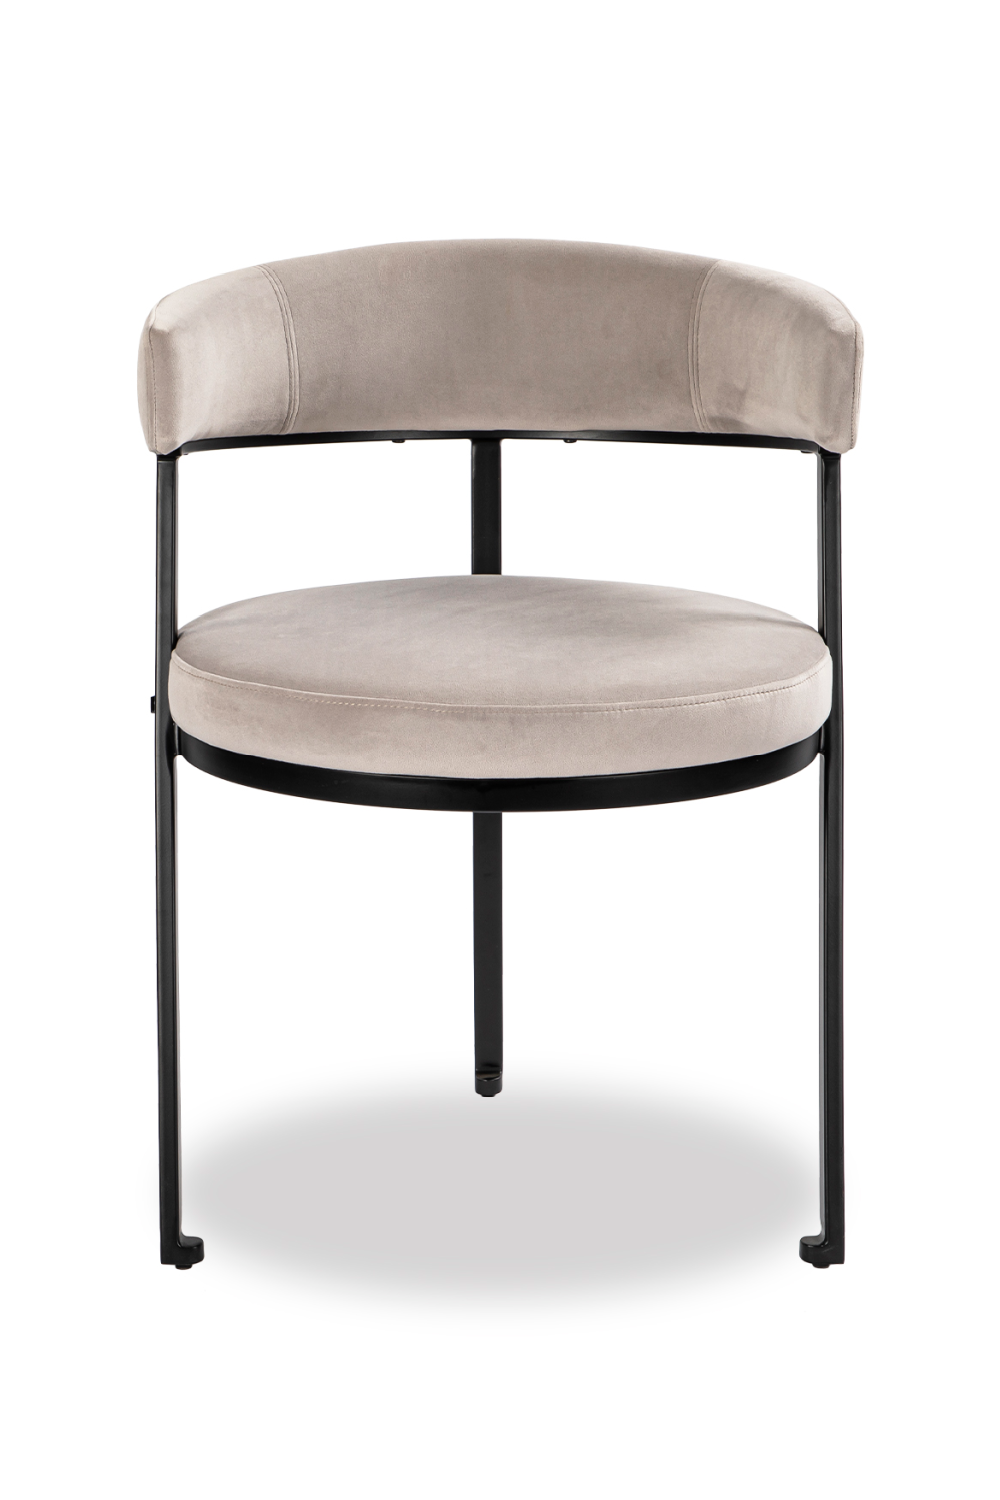 Round Seat Dining Chair | Liang & Eimil Bonnet | Oroa.com